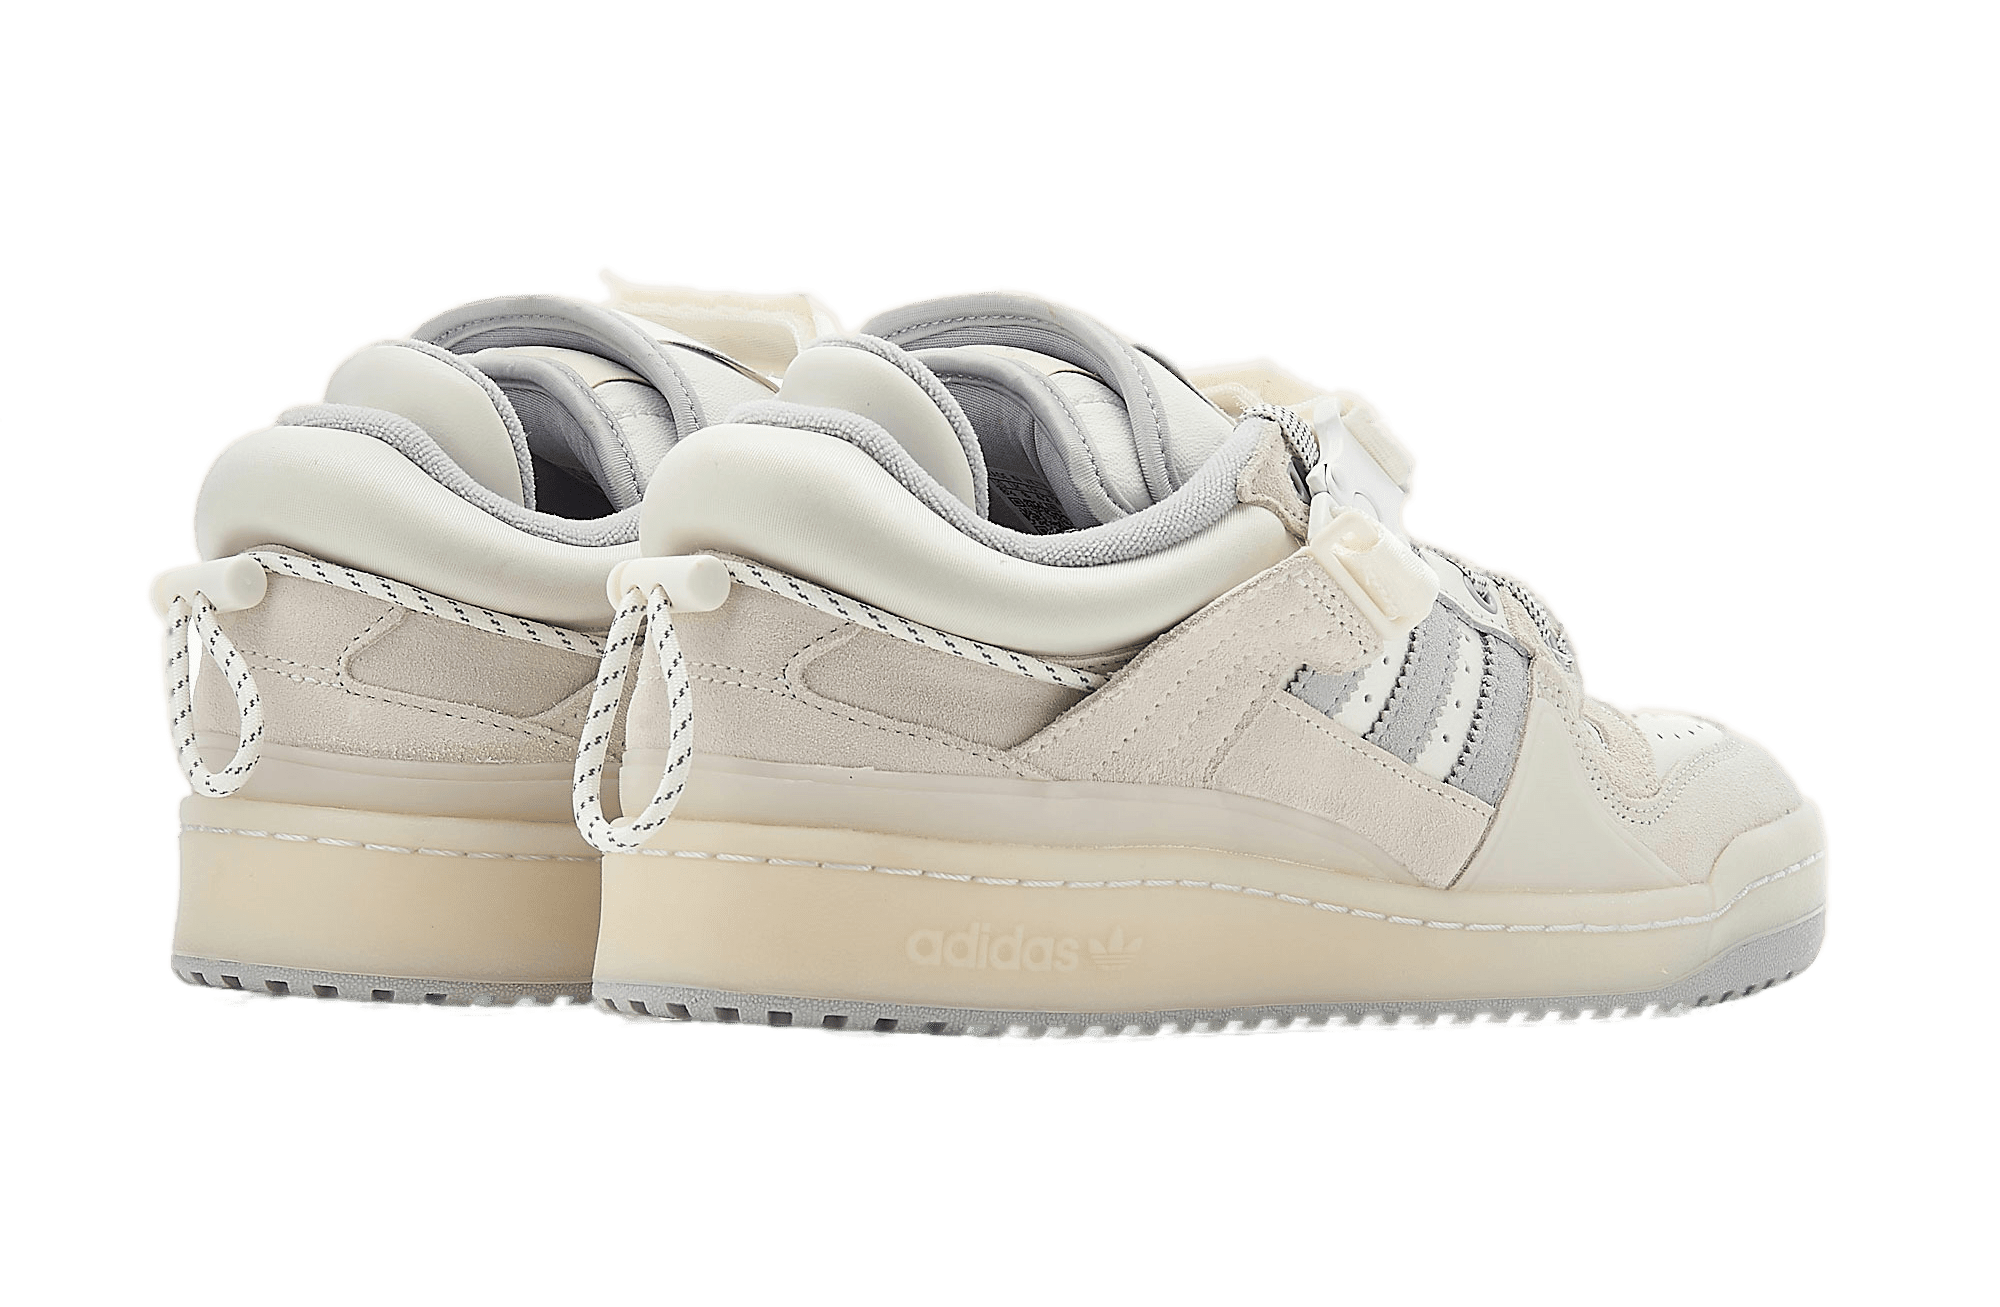 Adidas Forum Low x Bad Bunny – Cloud White SneakCenter